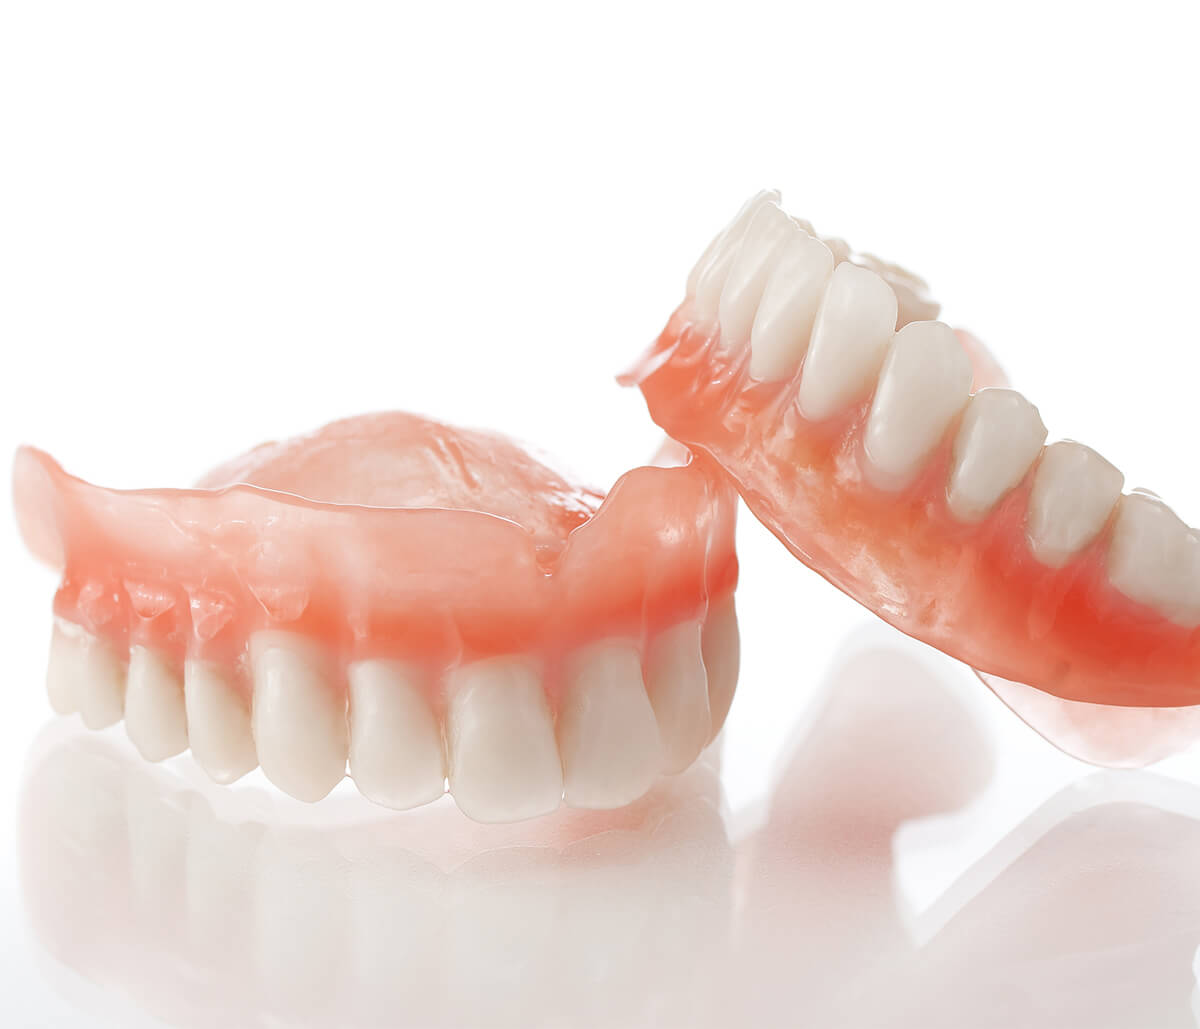 How Much Do Dentures Cost in Houston TX Area